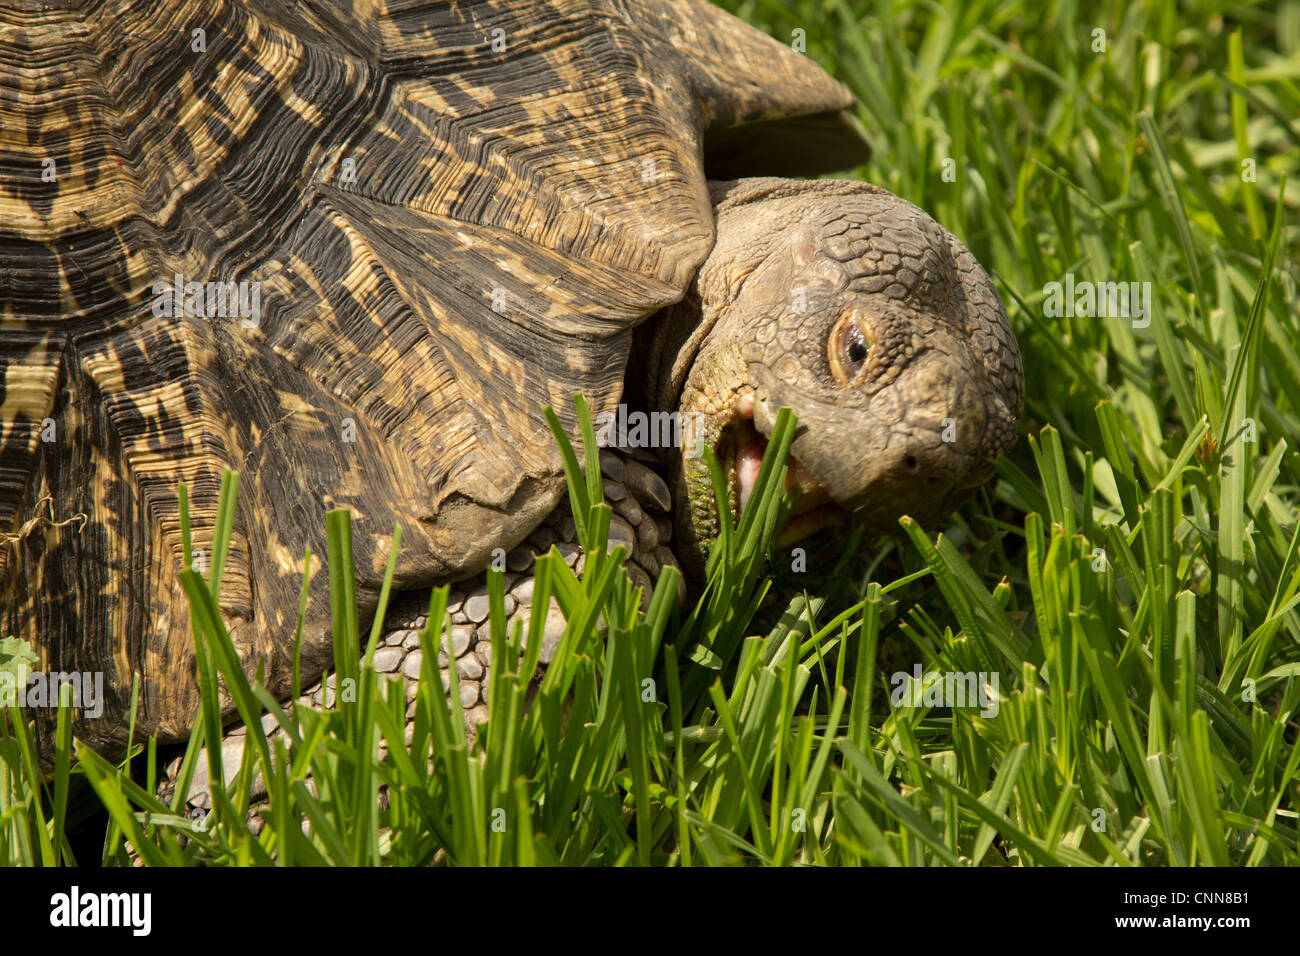 A turtle with it's mouth wide open about to eat grass Stock Photo